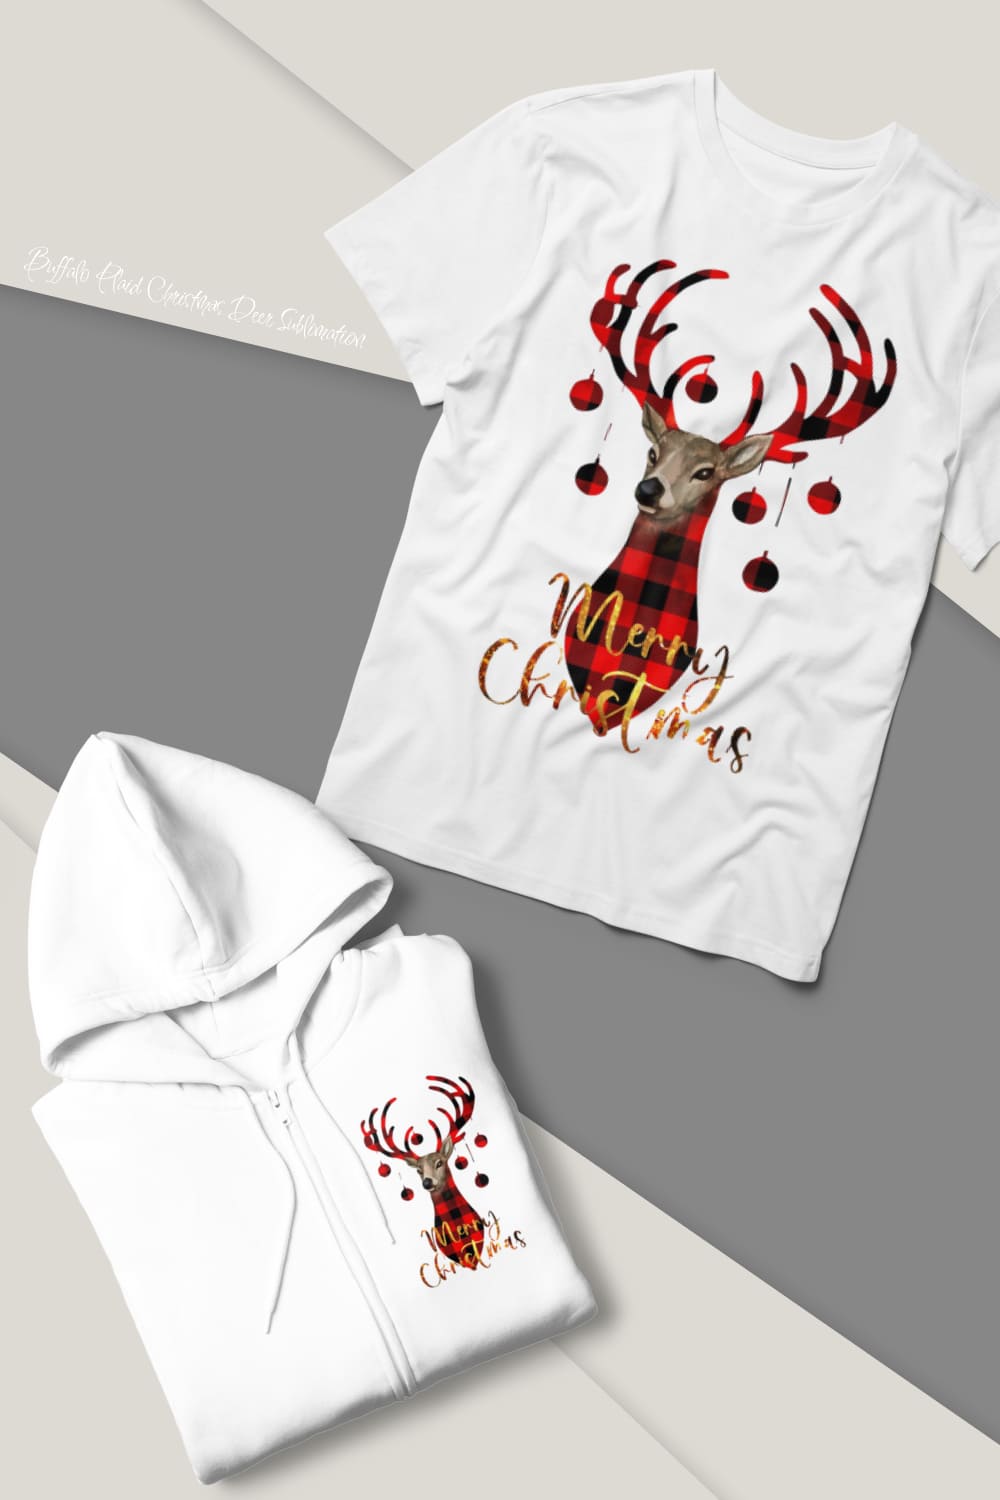 White t-shirt and hoodie with beautiful red Christmas deer print.